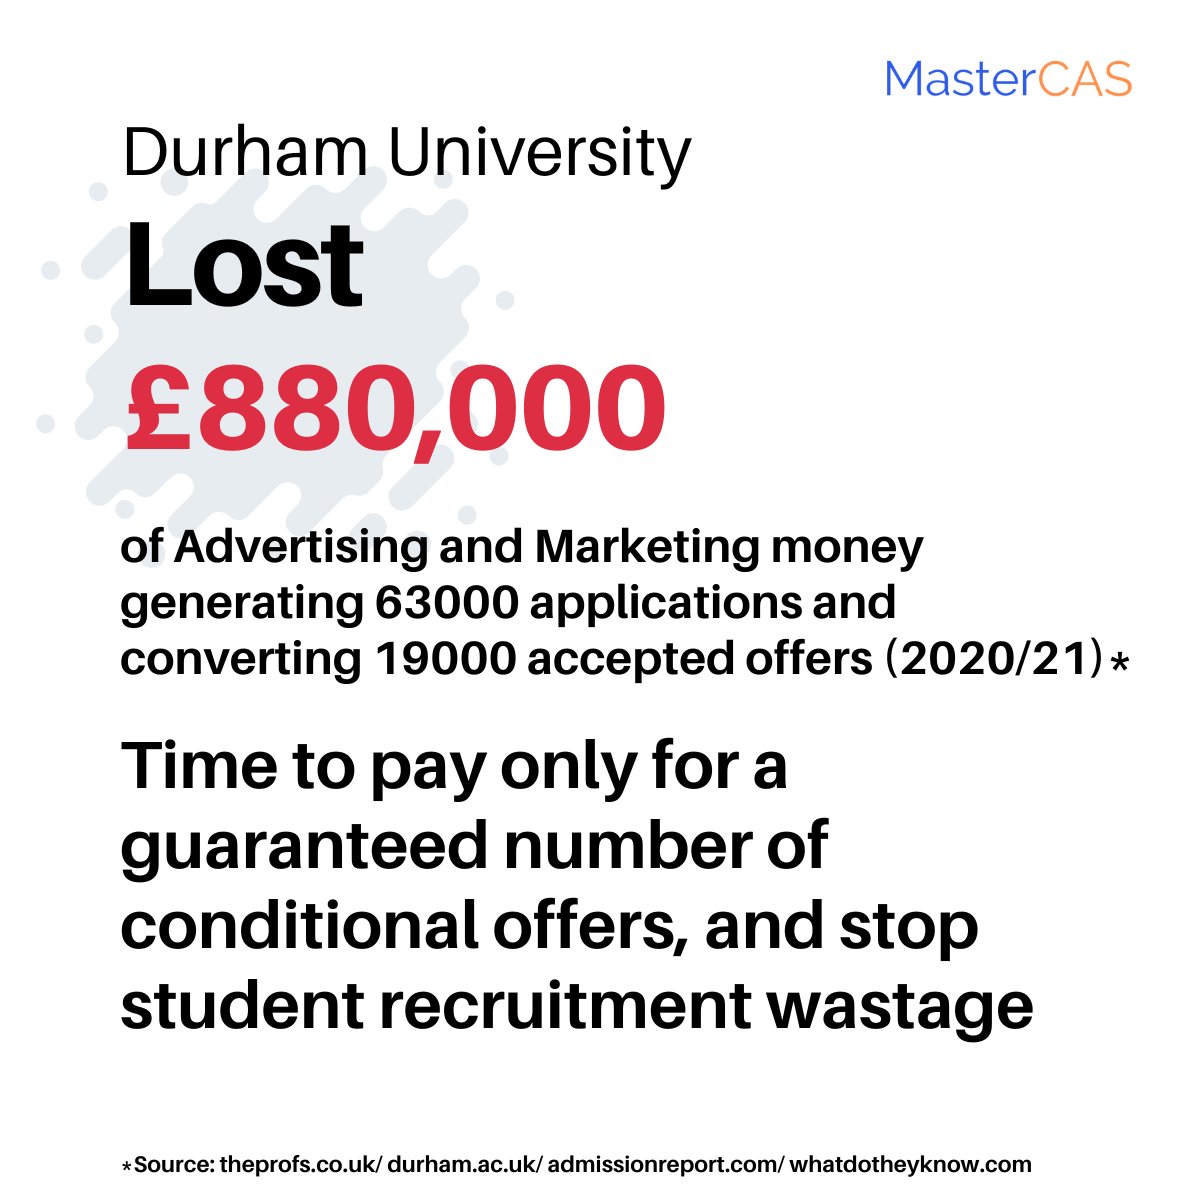 #intled #studentrecruitment for UK Universities has not changed much. It has made many adv and #marketing agencies rich, while #universities lose a ton of money each year trying out a range of digital and non-digital channels to generate demand for their programs. #pielive23